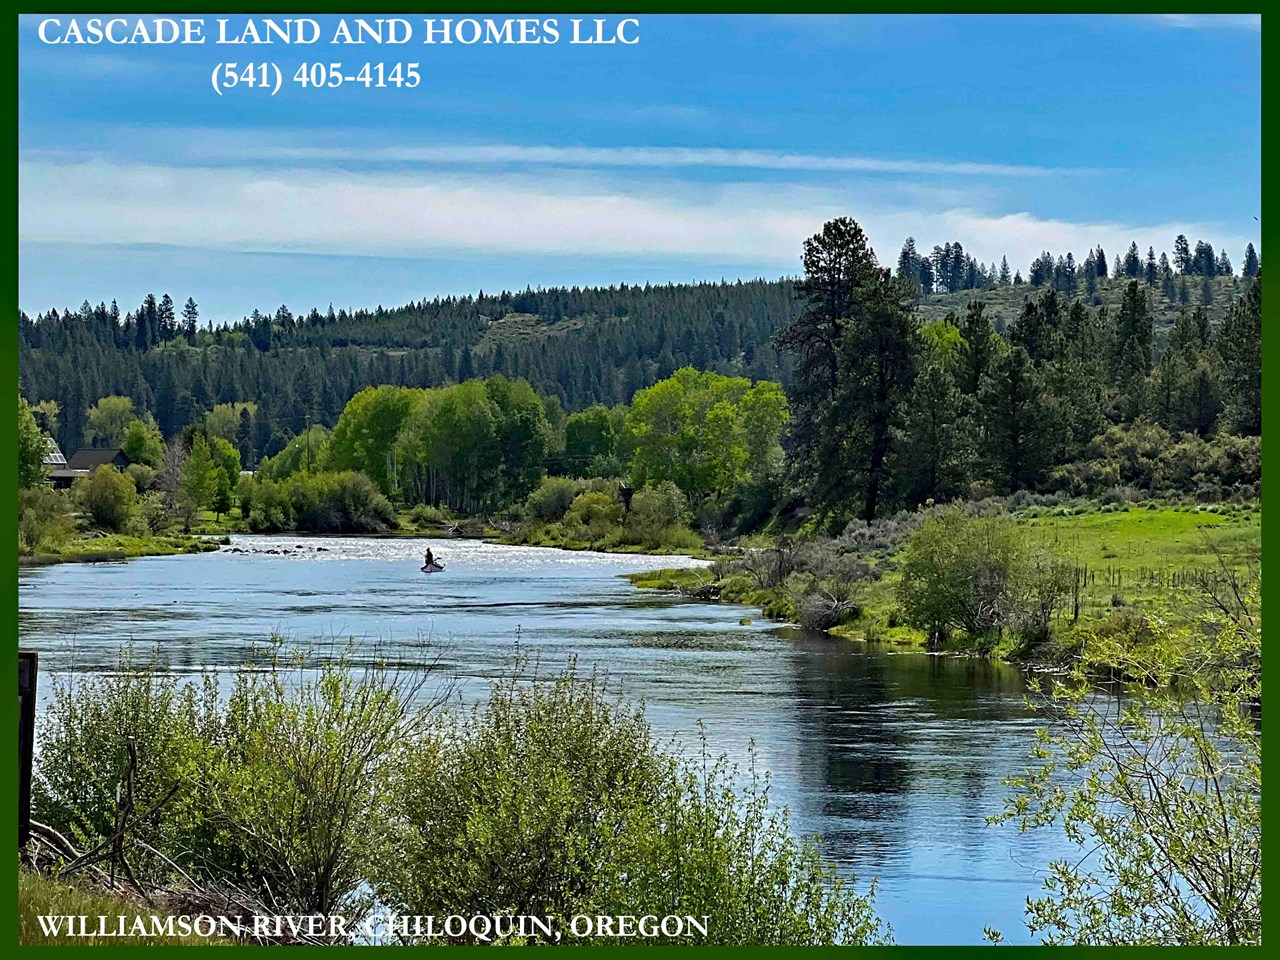 the sprague river converges with the williamson river just outside of chiloquin and flows on to provide the upper klamath lake with its primary source of fresh water! this photo was taken from the park just outside of chiloquin where there is an easy boat launch and parking area.